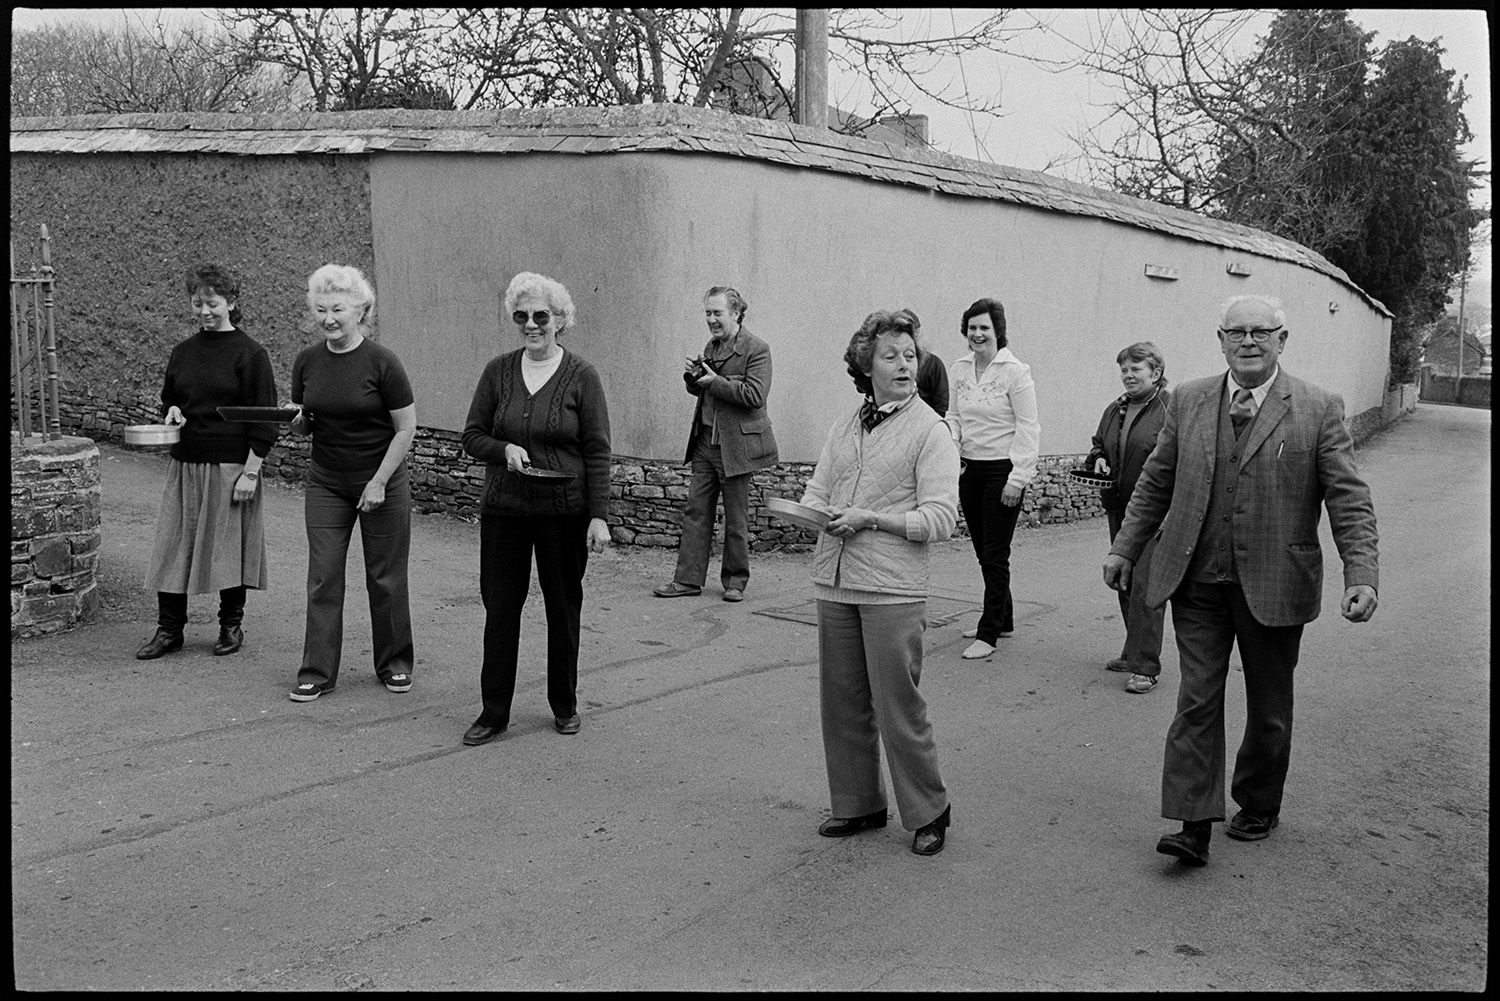 Children and parents at Pancake Race in village street.
[Women lined up by a wall in Fore Street, Dolton at the start line of a pancake race. A man in the background has a camera to photograph the race.]